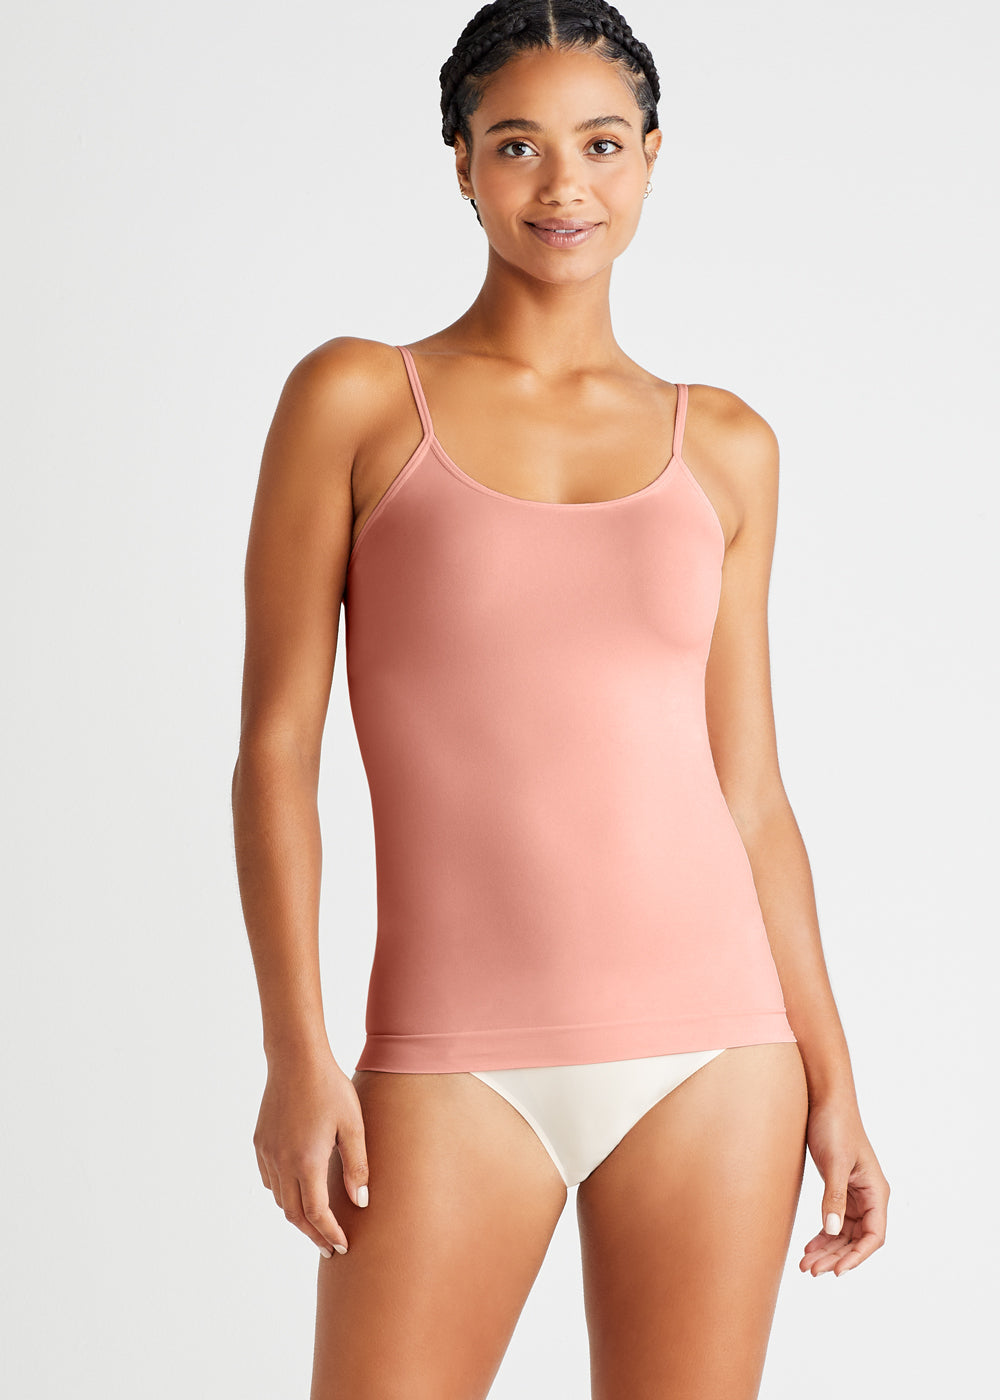 Non-Shaping Camisole - Seamless from Yummie in Impatiens Pink  - 1